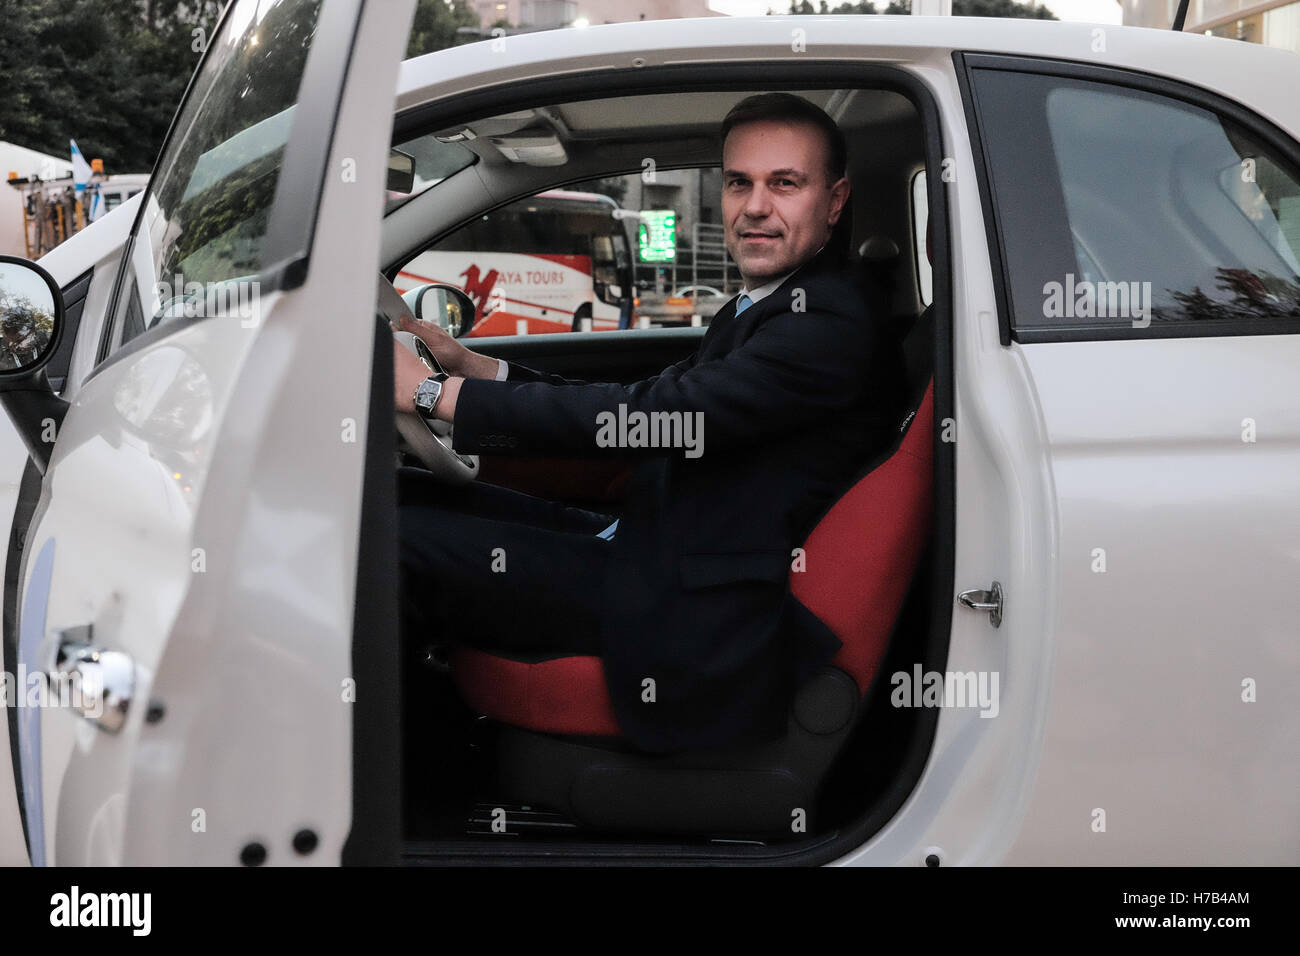 Tel Aviv, Israel. 3rd November, 2016. VIRGILIO CERUTTI, Head of Business Development Central Coordination, at Fiat Chrysler Automobiles, displays the M-15, a retail ready vehicle that complies with EU Euro 6 regulations, able to run on a blend of gasoline and methanol from 0 to 15%, at the Fuel Choices Summit exhibition. The fourth annual summit seeks to promote a revolution in alternative fuels and smart mobility, for a world free of oil, populated by clean, accessible and efficient means of transportation and to promote Israel’s goal of reducing 60% of the country’s oil consumption by 2025. Stock Photo